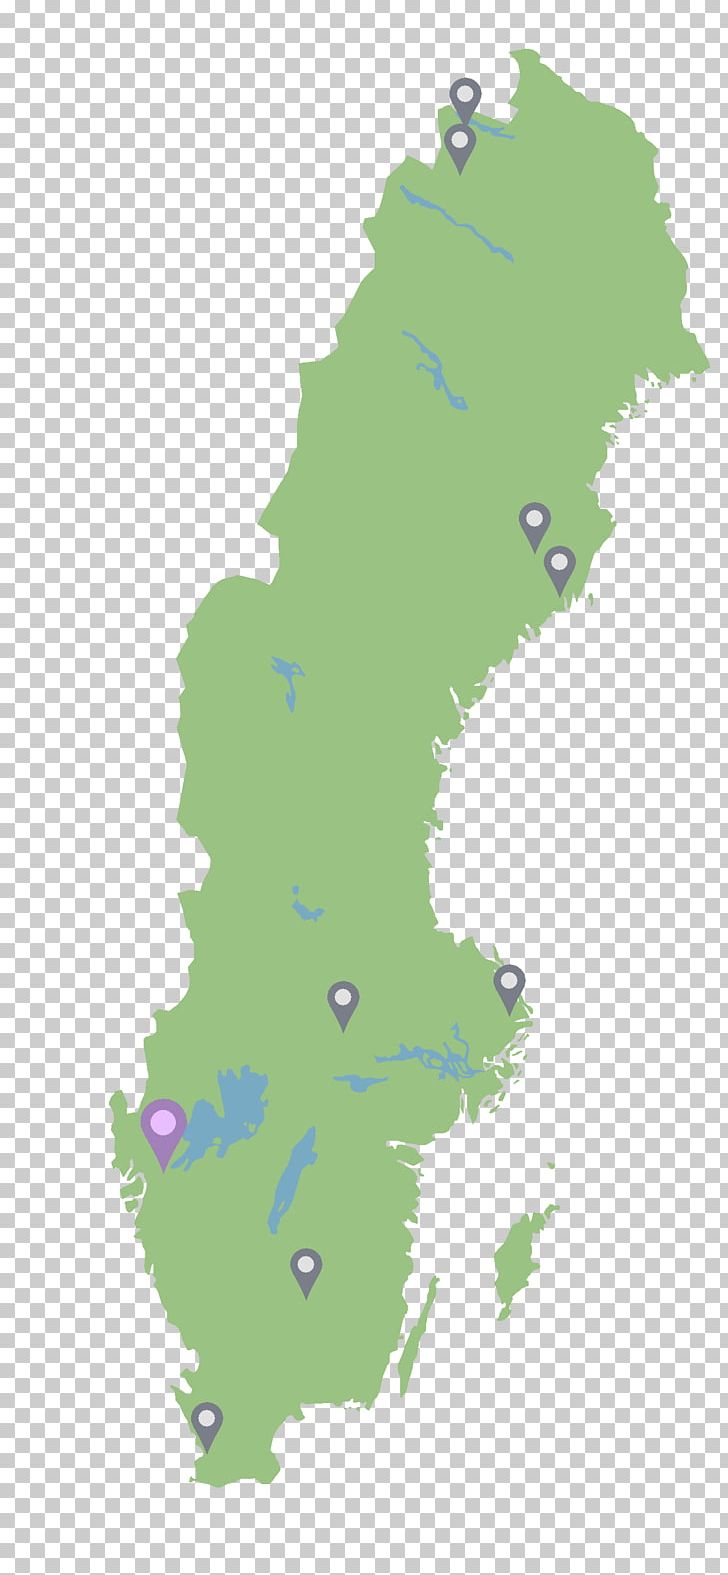 Sweden Graphics Illustration PNG, Clipart, Area, Ecoregion, Istock, Map, Photography Free PNG Download